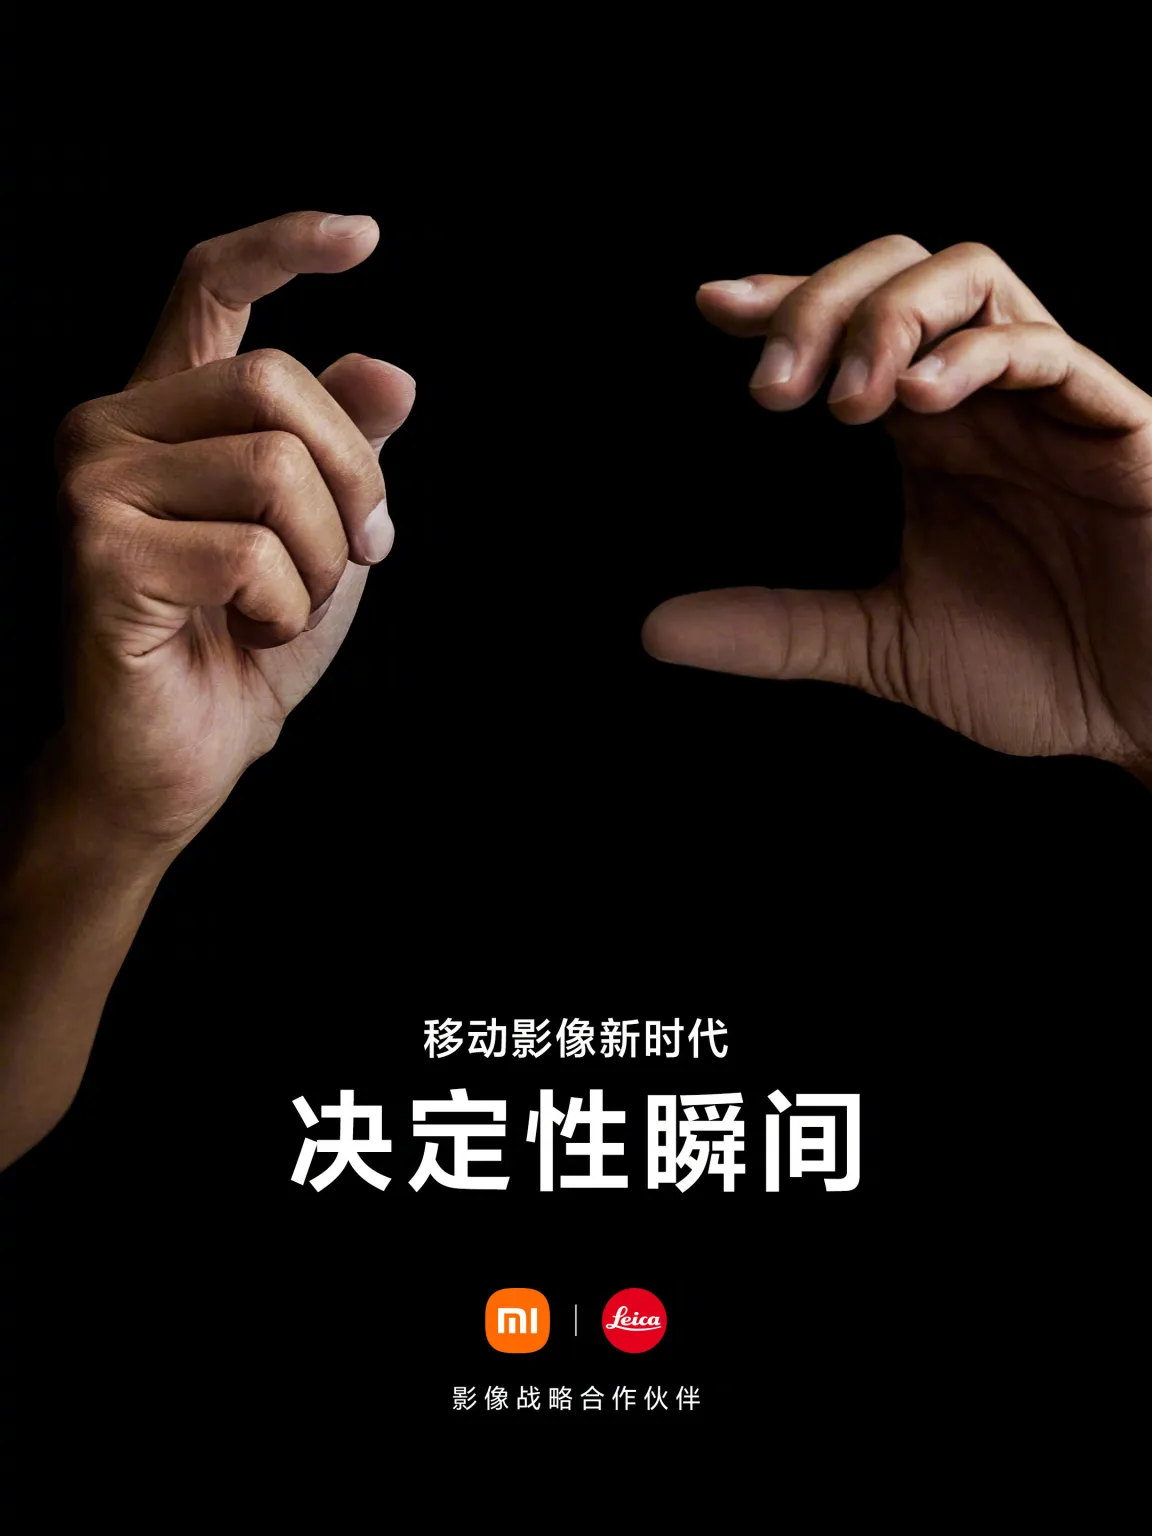 Official: Xiaomi and Leica will usher in a new era of mobile photography – фото 1